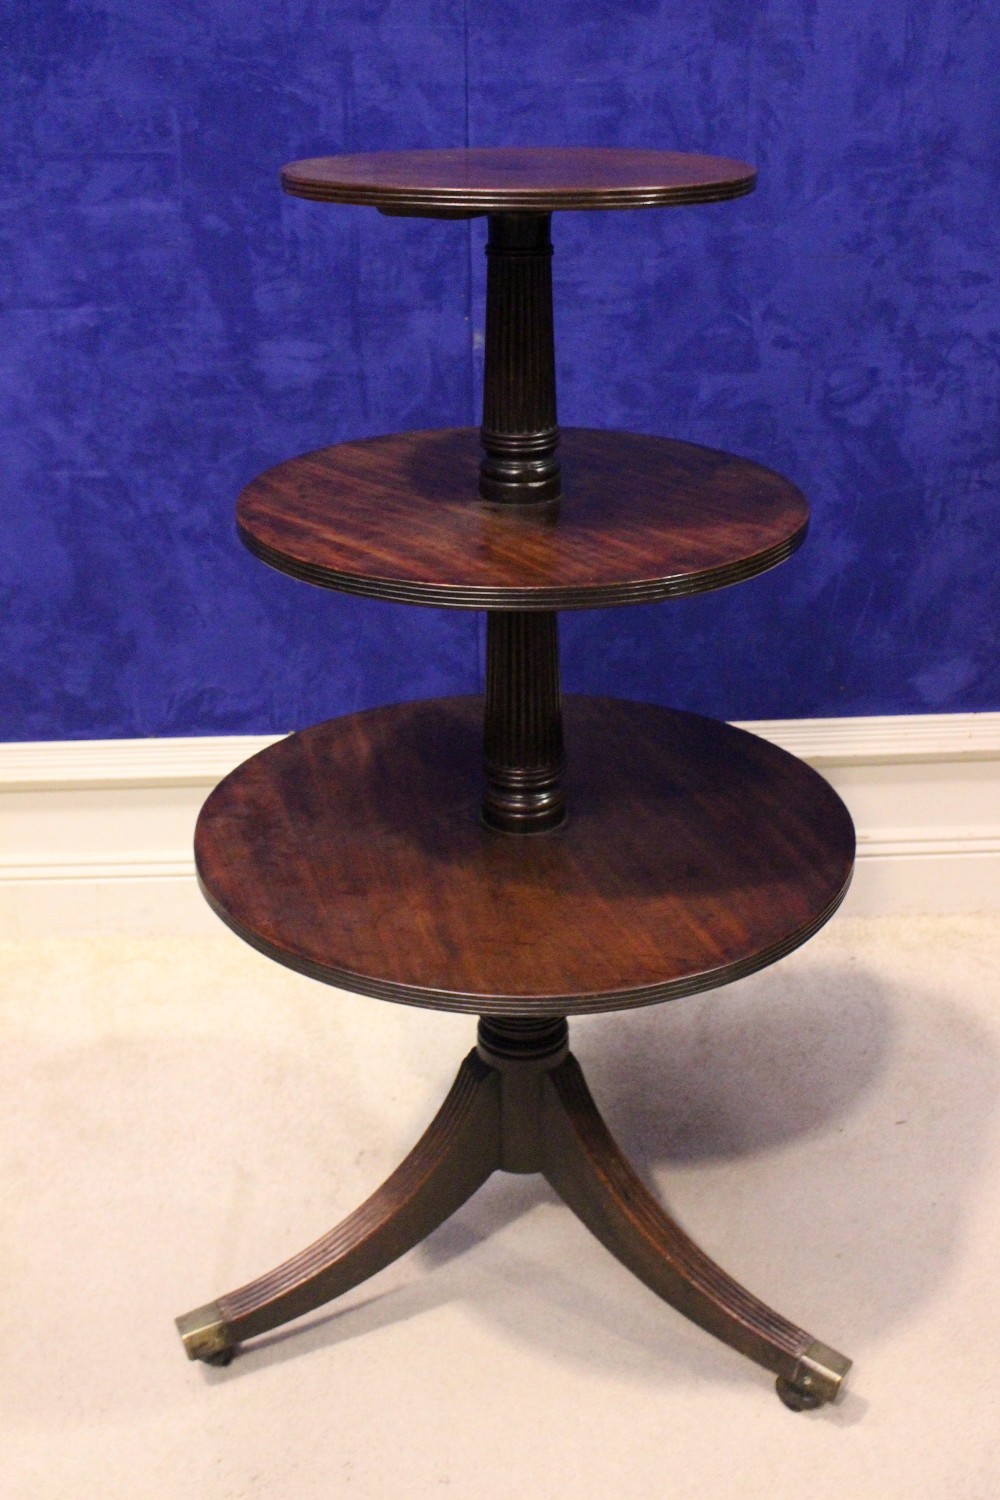 A VERY FINE IRISH GEORGIAN MAHOGANY ‘DUMB WAITER”, with fluted and turned column supports, 3 tiers